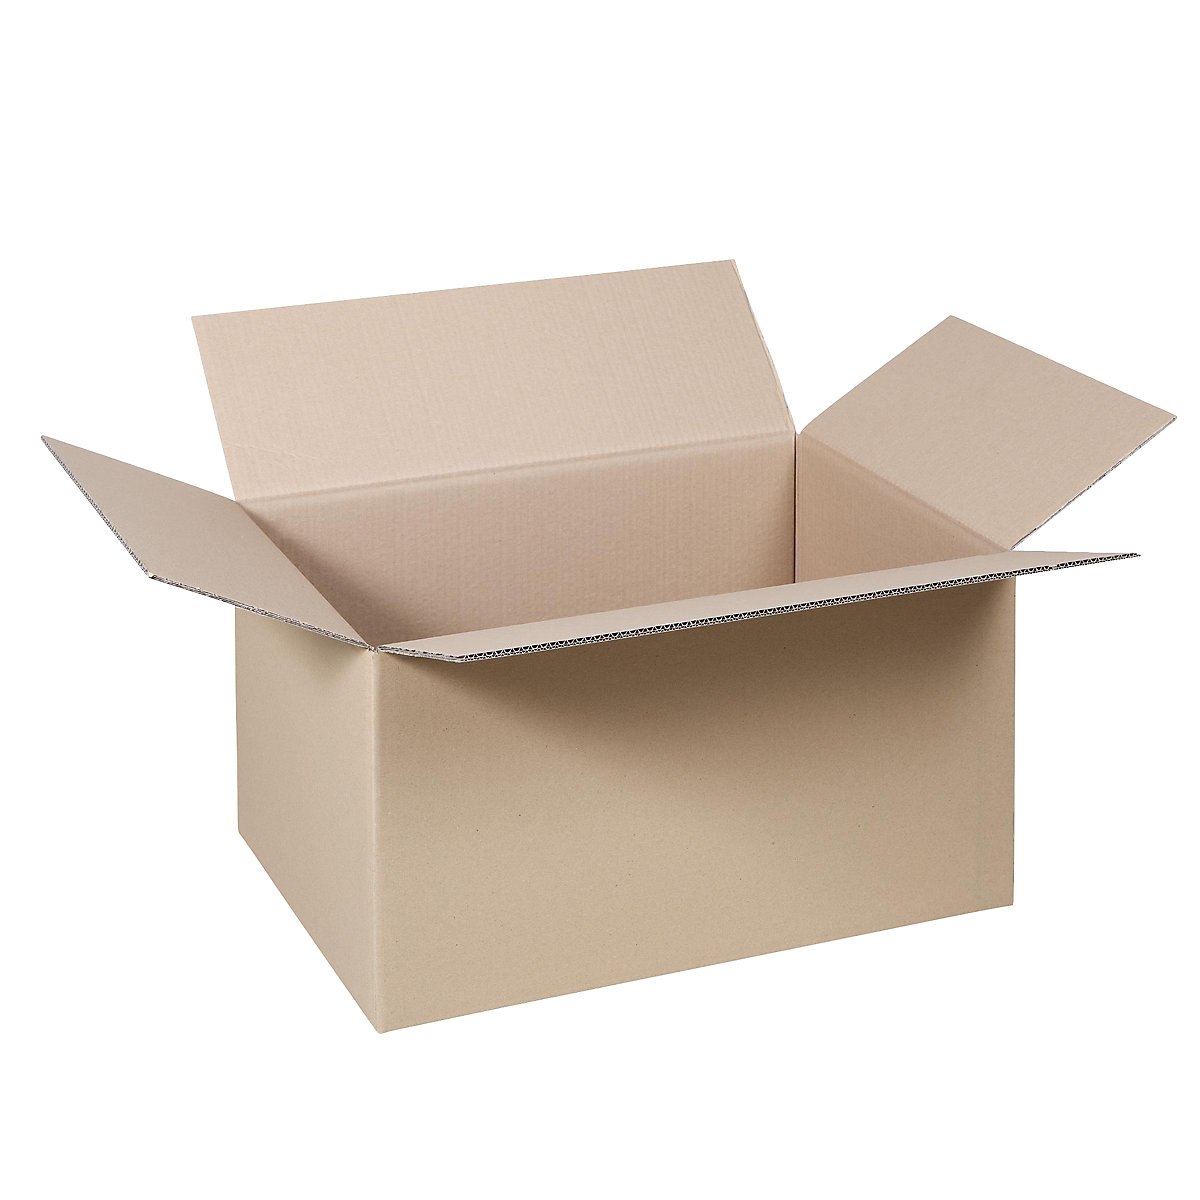 Folding cardboard box, FEFCO 0201, made of double fluted cardboard, internal dimensions 500 x 400 x 400 mm, pack of 100-13